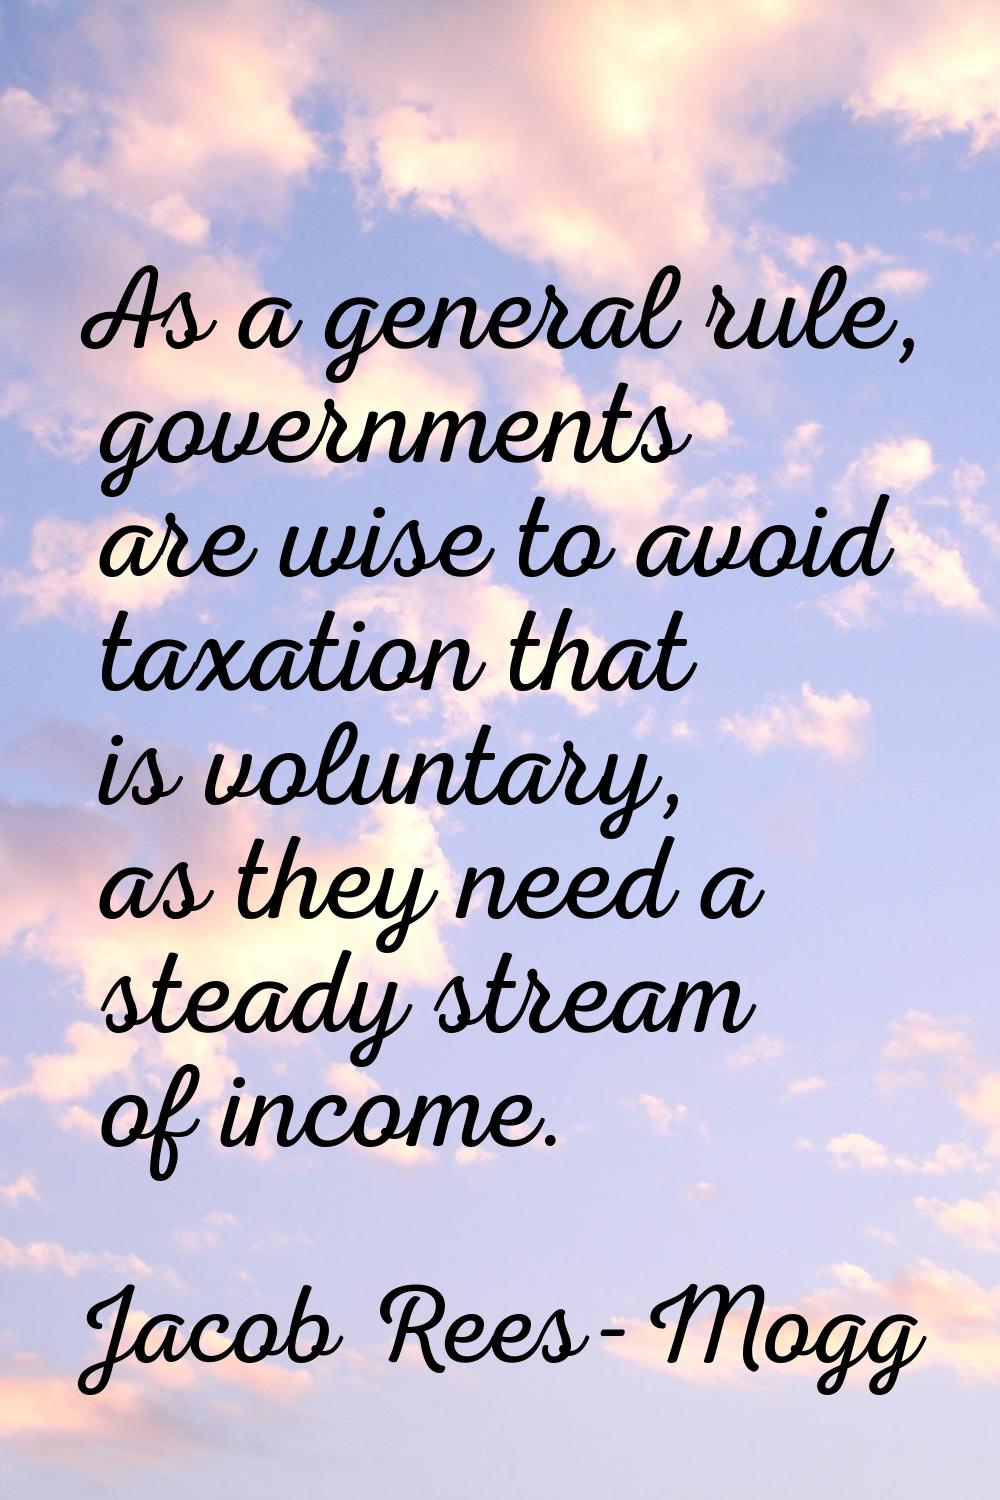 As a general rule, governments are wise to avoid taxation that is voluntary, as they need a steady 